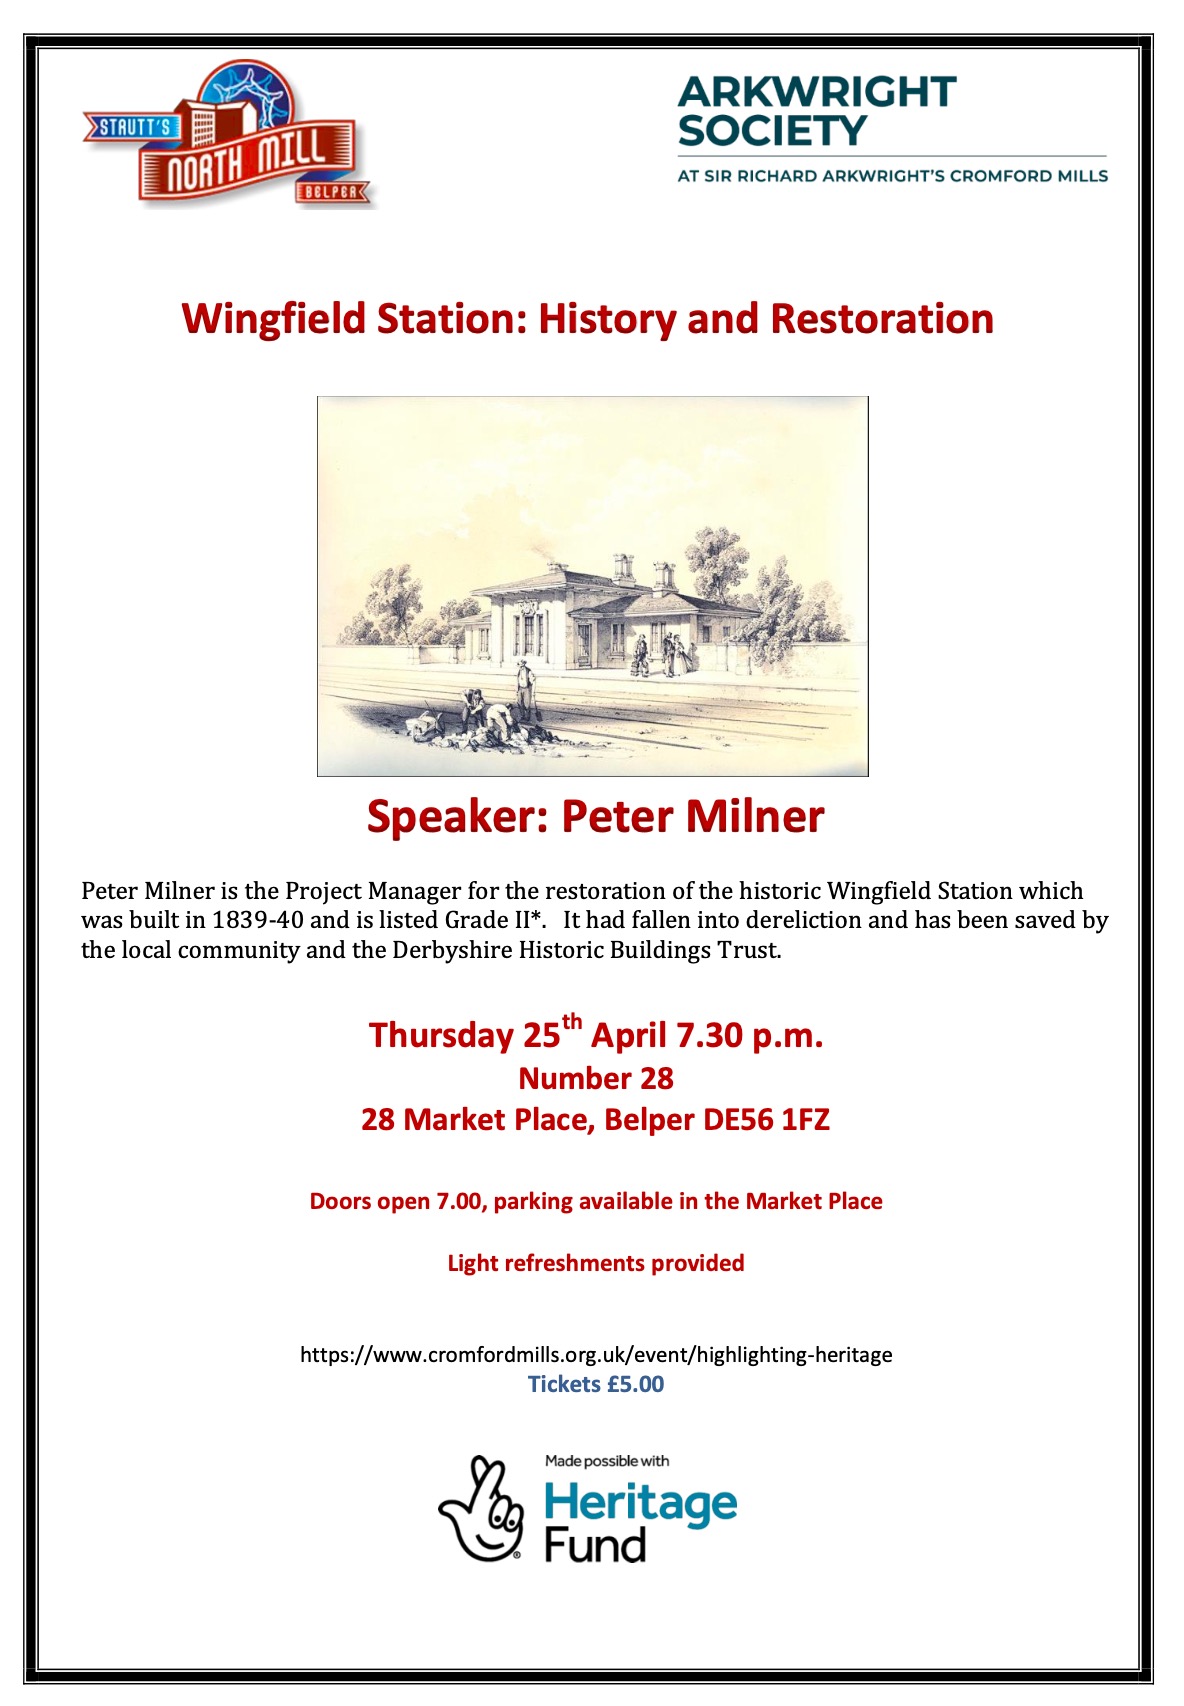 Flyer: Wingfield Station: History and Restoration Speaker: Peter Milner. Peter Milner is the Project Manager for the restoration of the historic Wingfield Station which was built in 1839-40 and is listed Grade II*. It had fallen into dereliction and has been saved by the local community and the Derbyshire Historic Buildings Trust. Thursday 25th April 7.30 p.m. Number 28, 28 Market Place, Belper DE56 1FZ. Doors open 7.00, parking available in the Market Place. Light refreshments provided. https://www.cromfordmills.org.uk/event/highlighting-heritage. Tickets £5.00